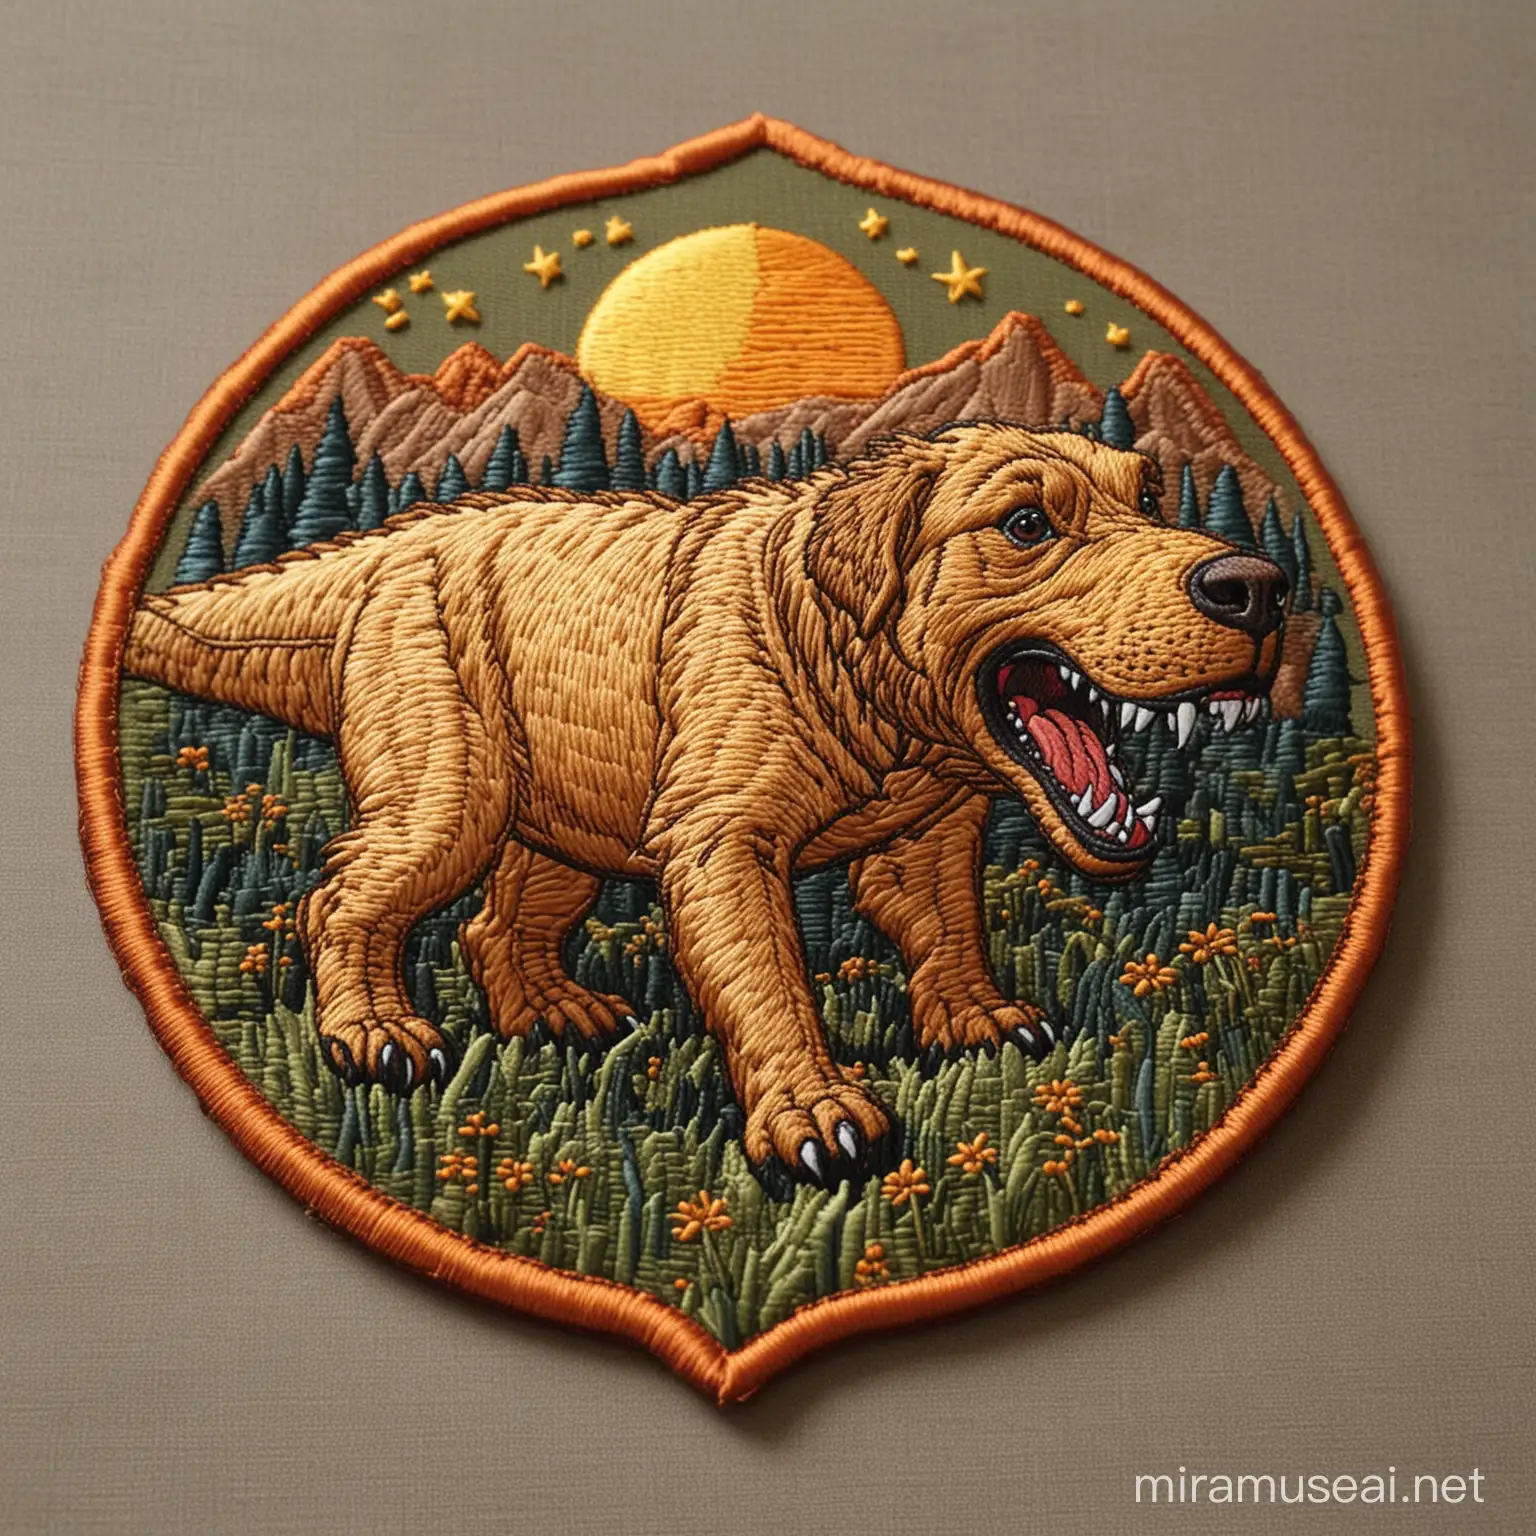 Embroidered Patch of TRex Golden Retriever Mix Minimalist Art with Thick Lines